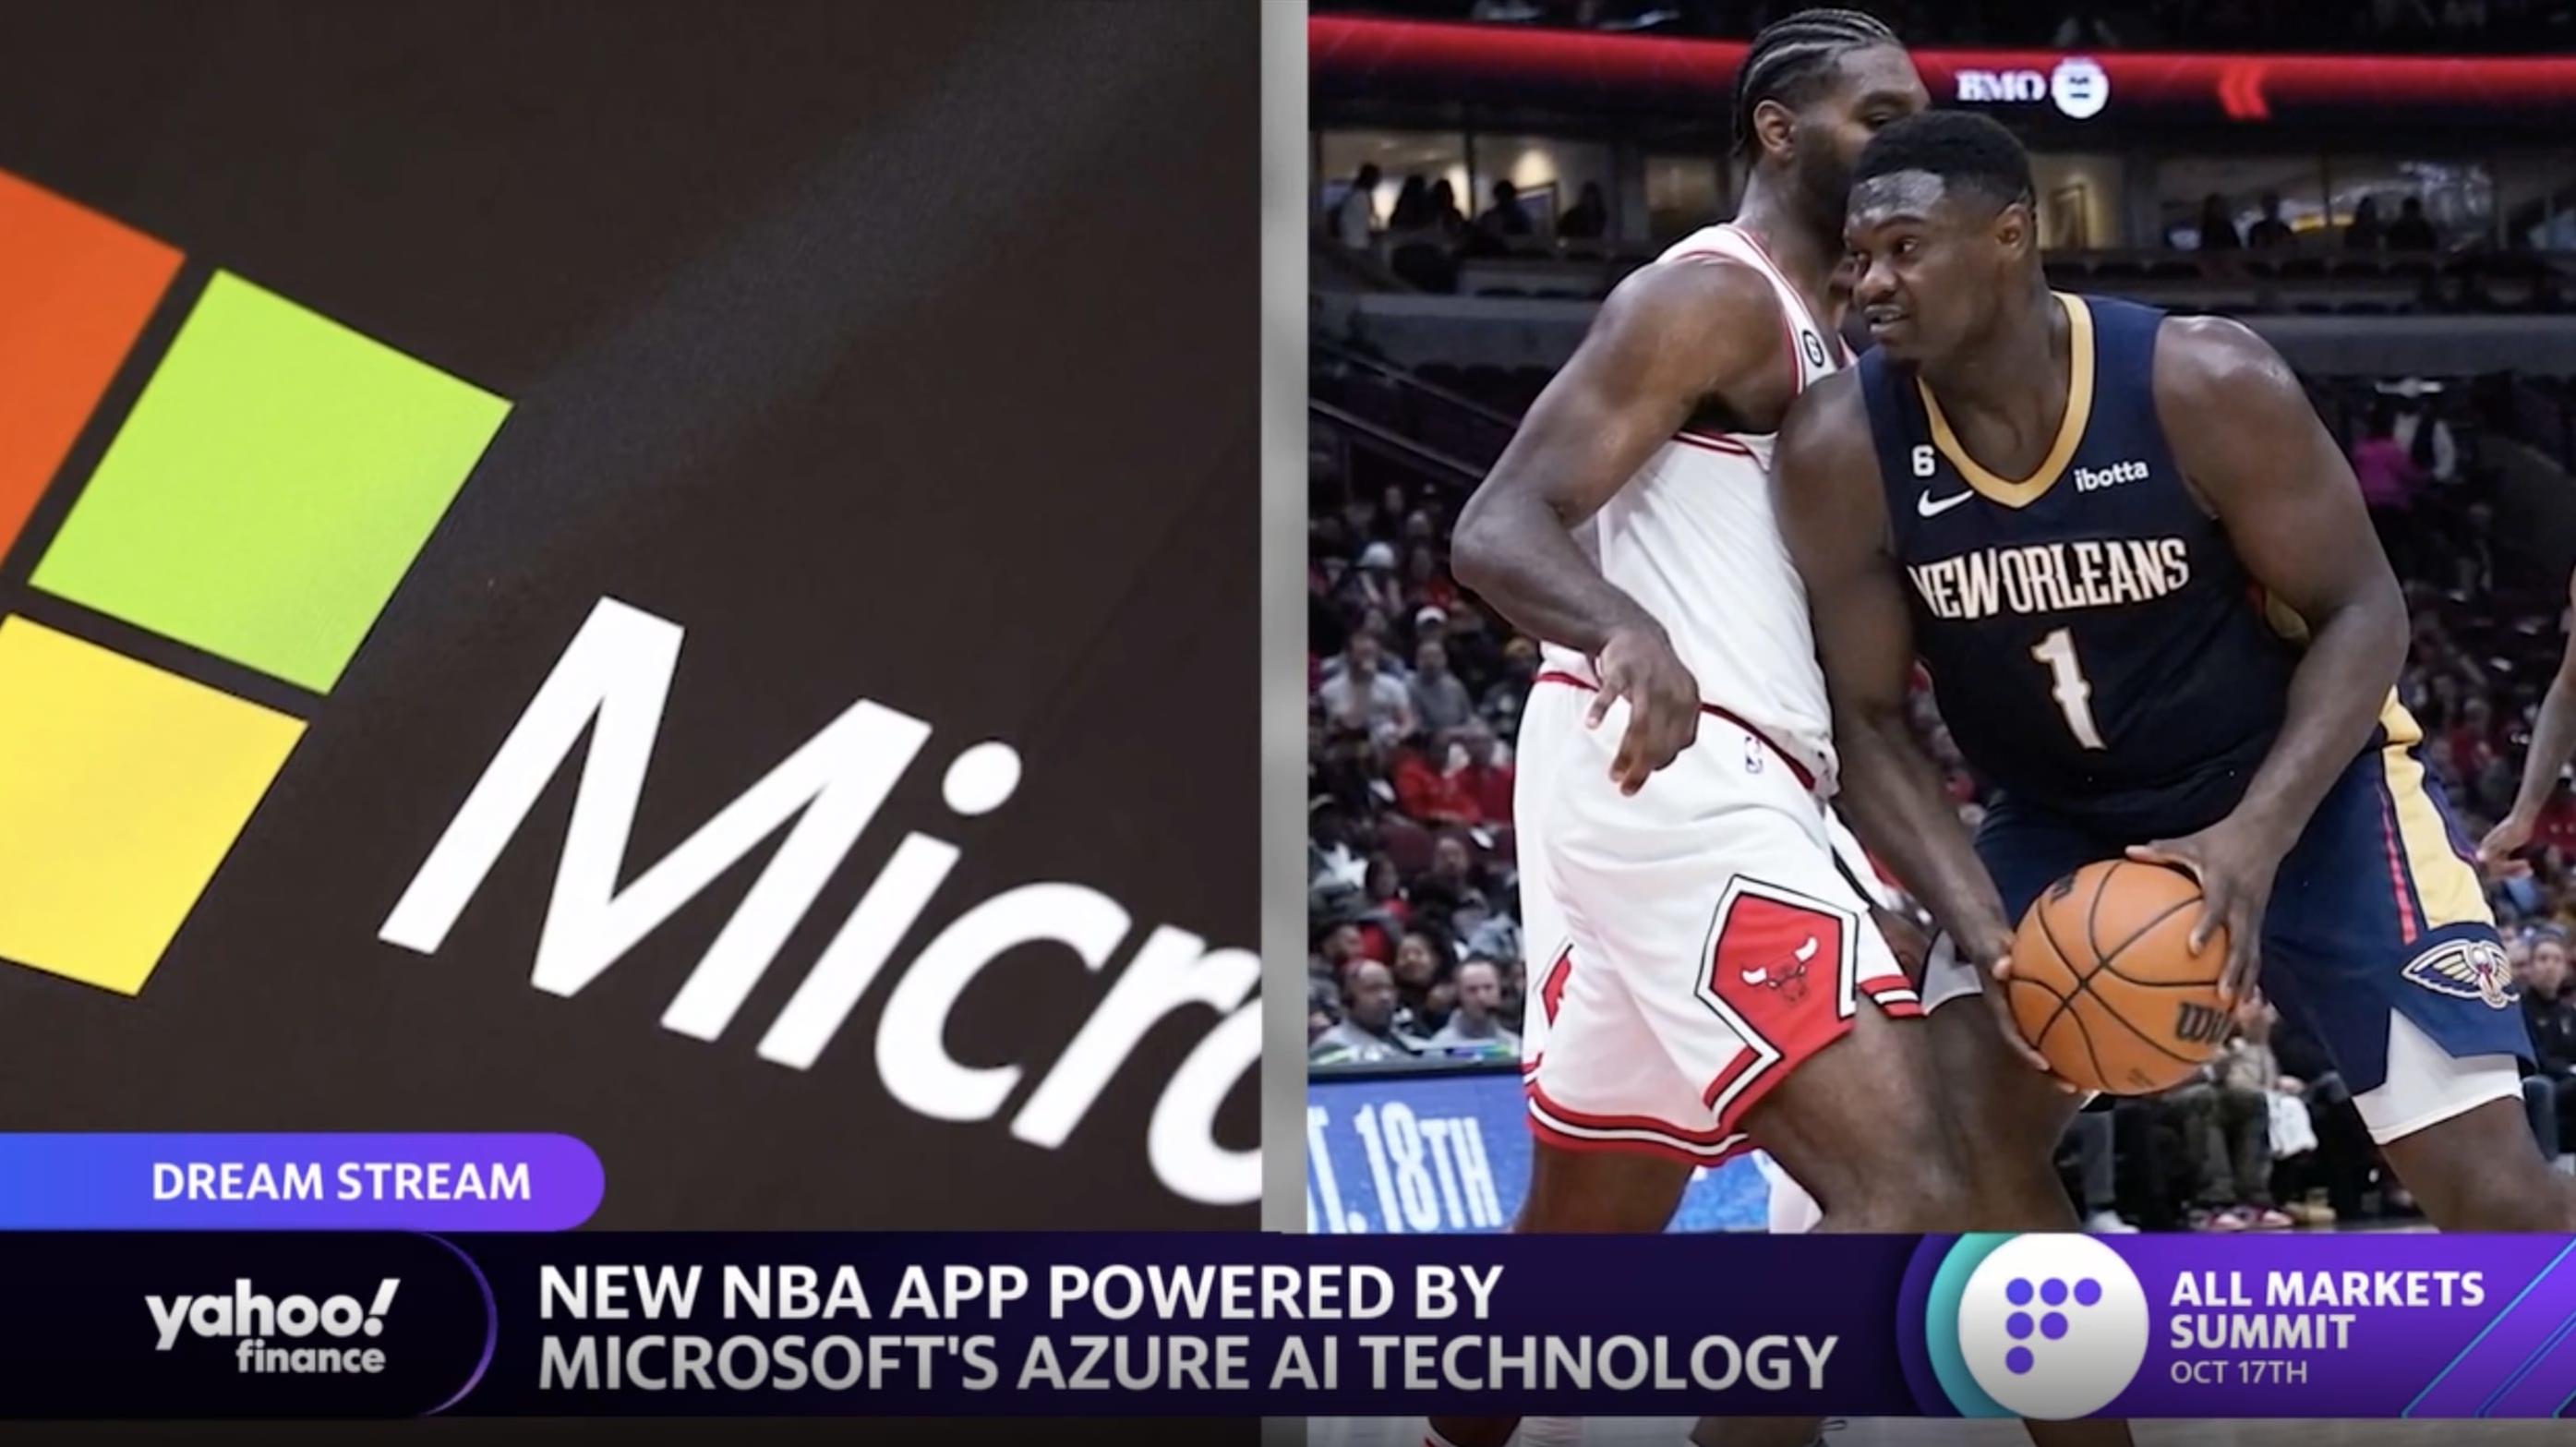 NBA partners with Microsoft on new streaming app